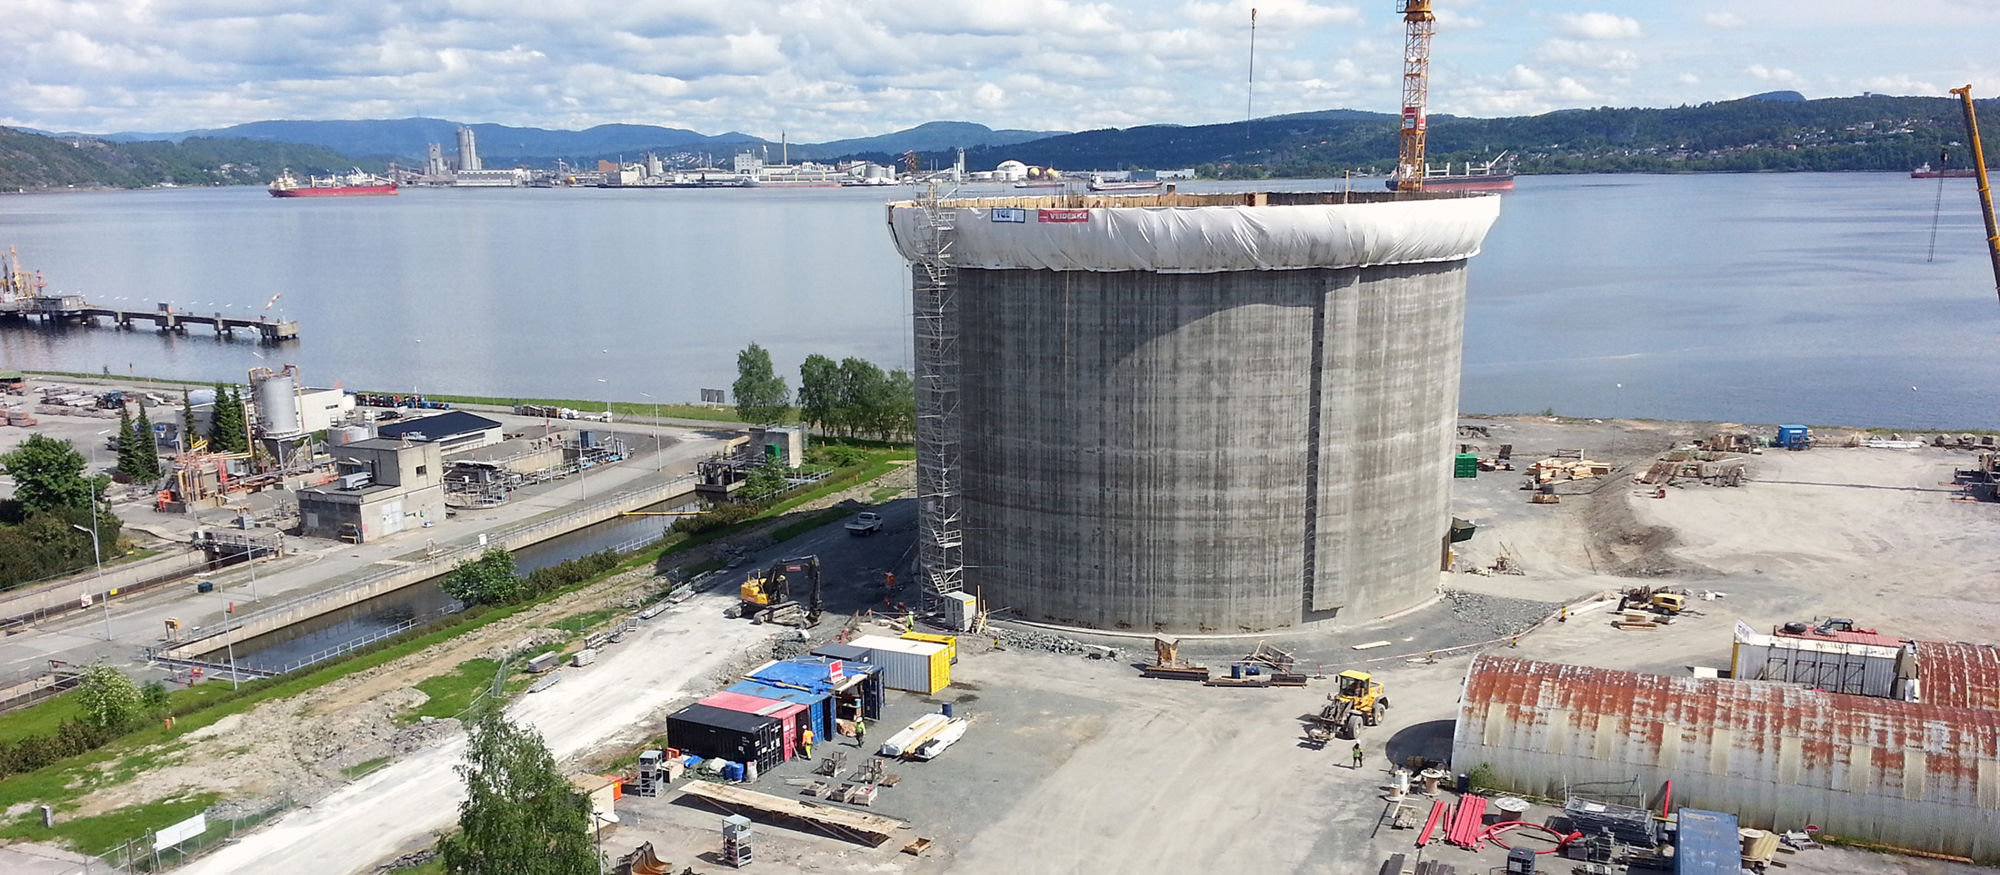 Ethane tank in concrete. Construction crane and views to the sea. Photo.